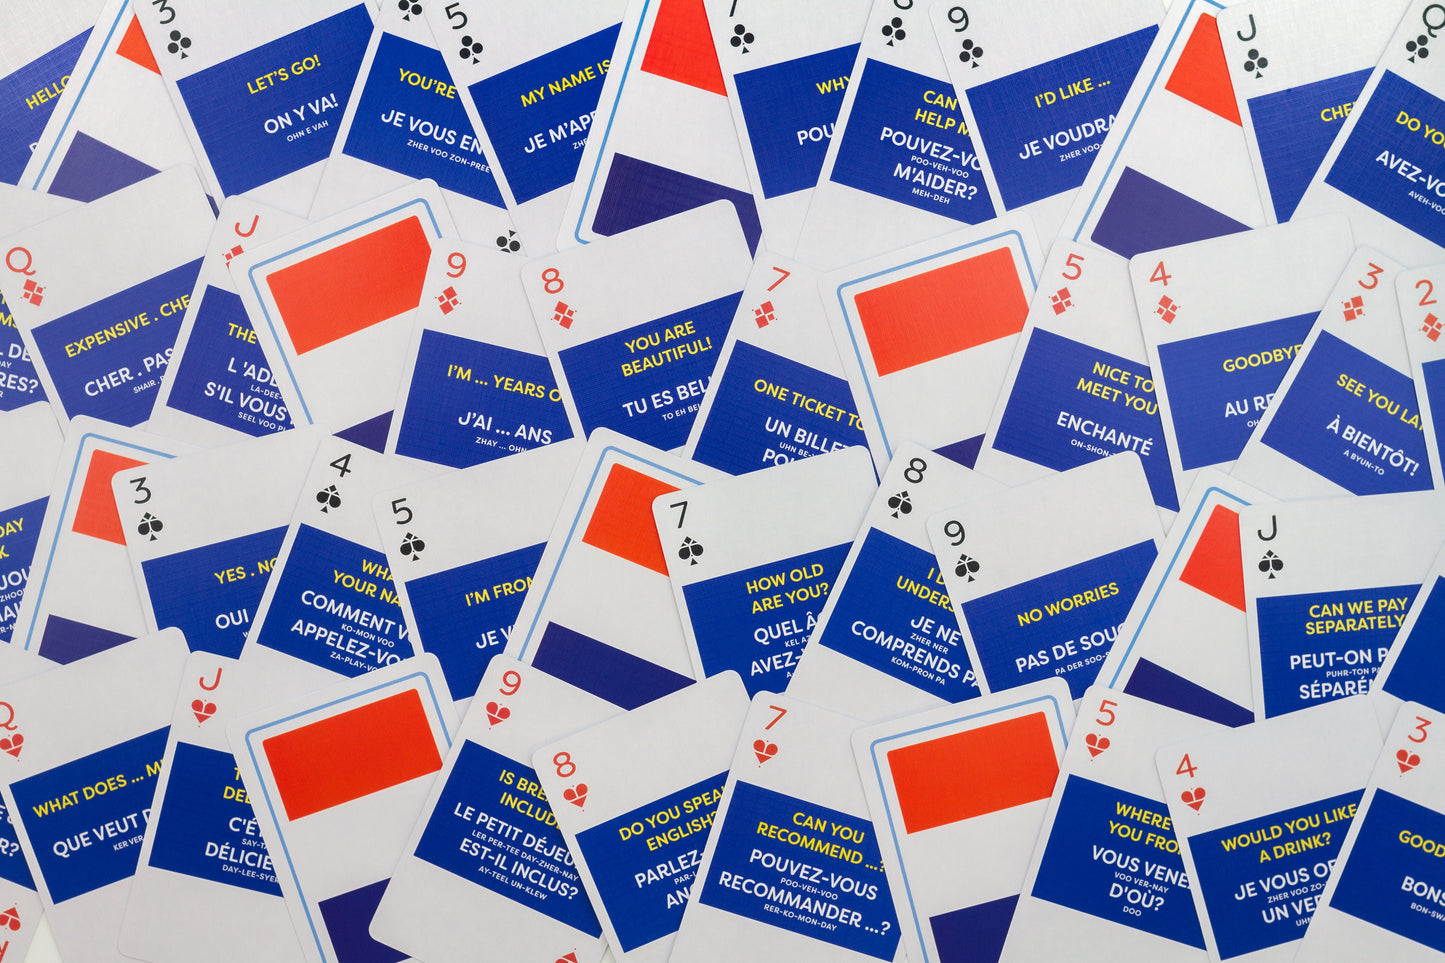 French Playing Cards